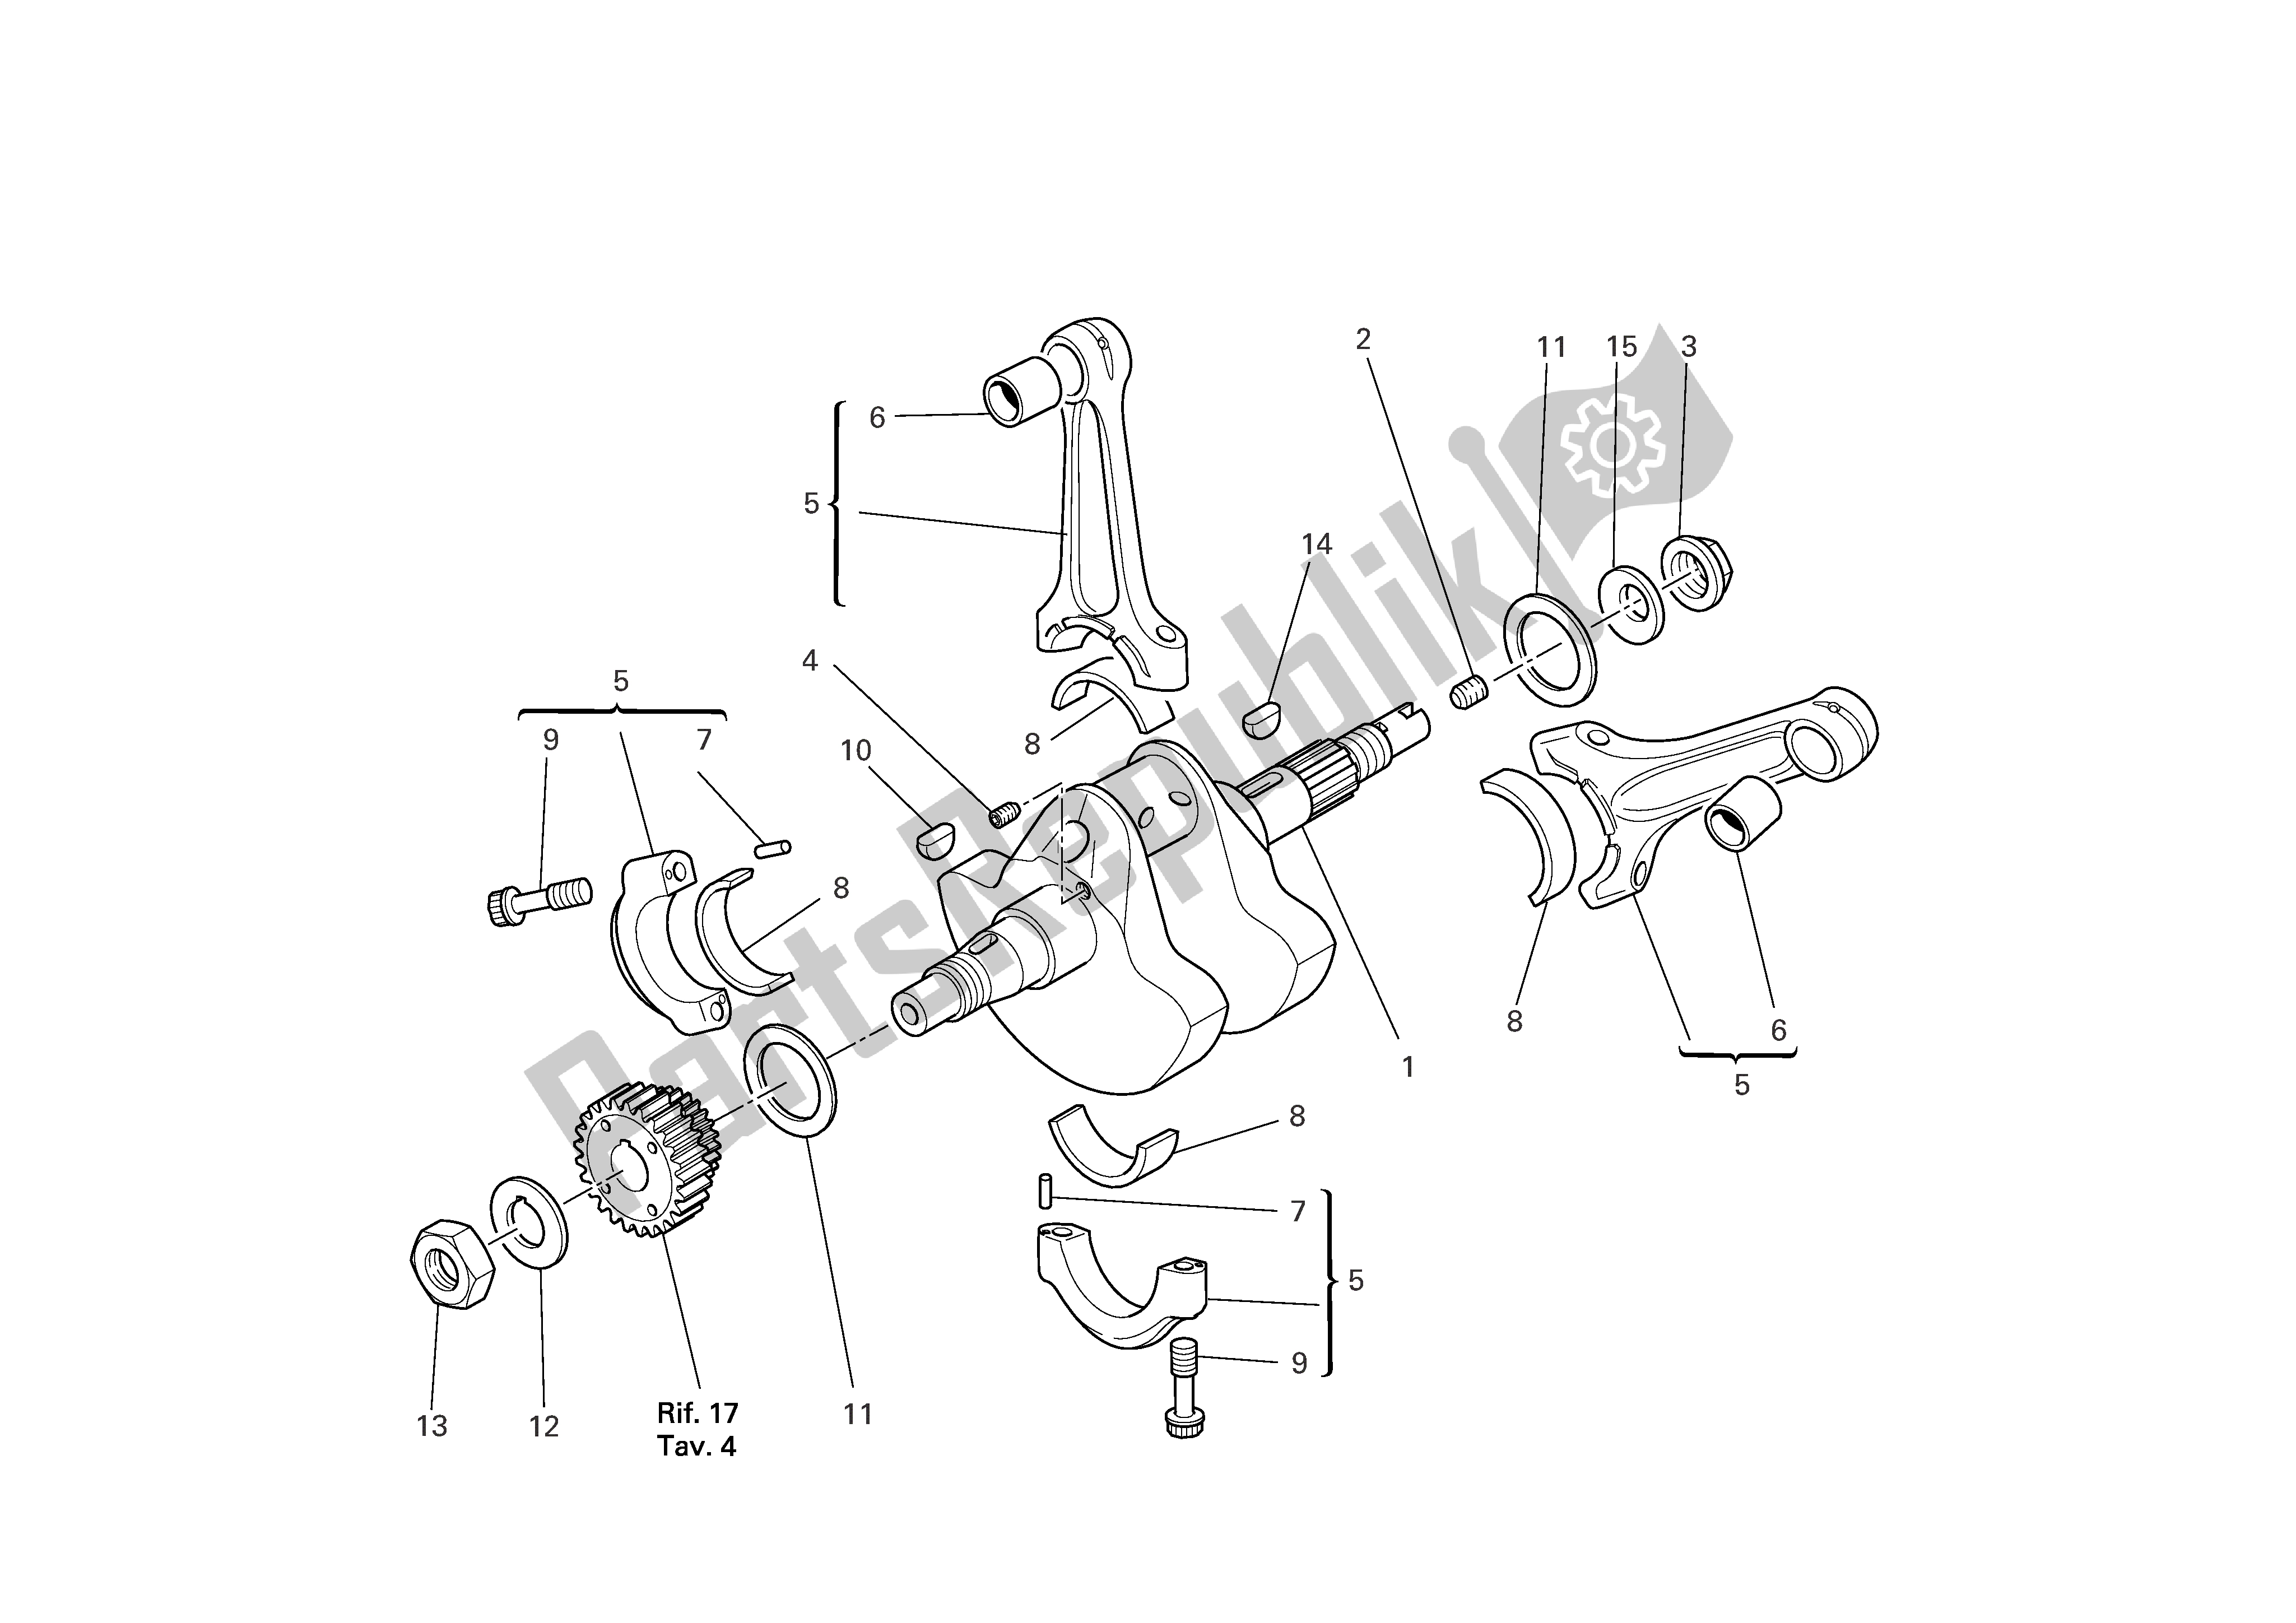 All parts for the Connecting Rods of the Ducati Multistrada 1000 2005